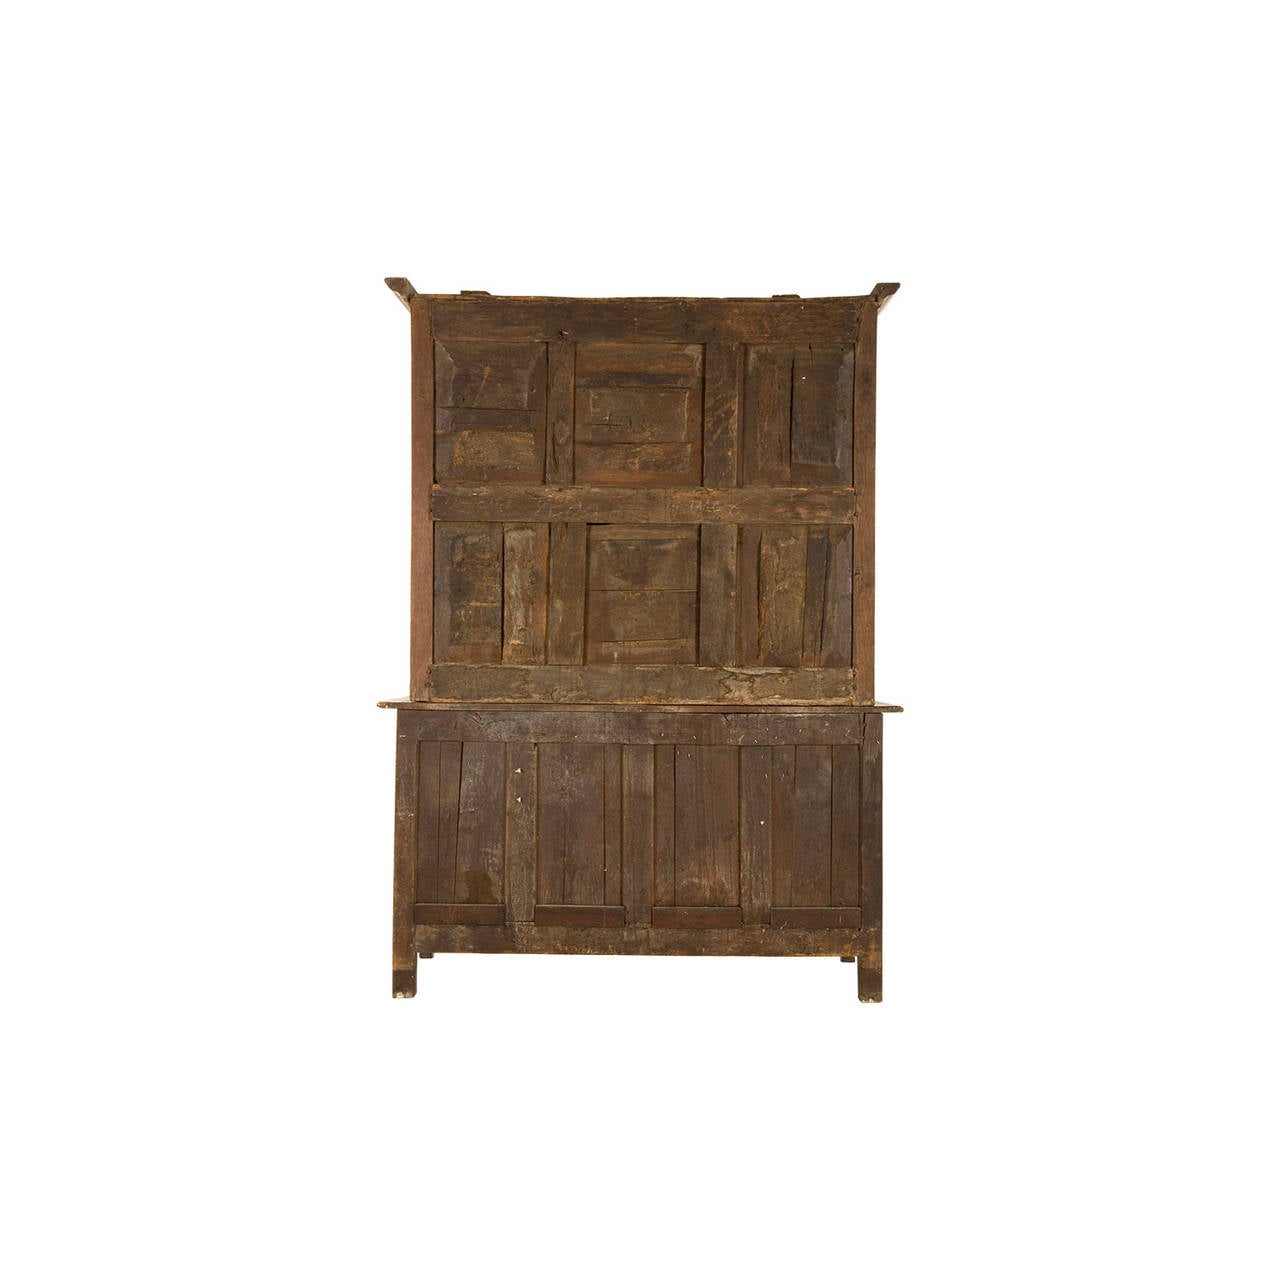 Wood Antique French Break-Front Cabinet